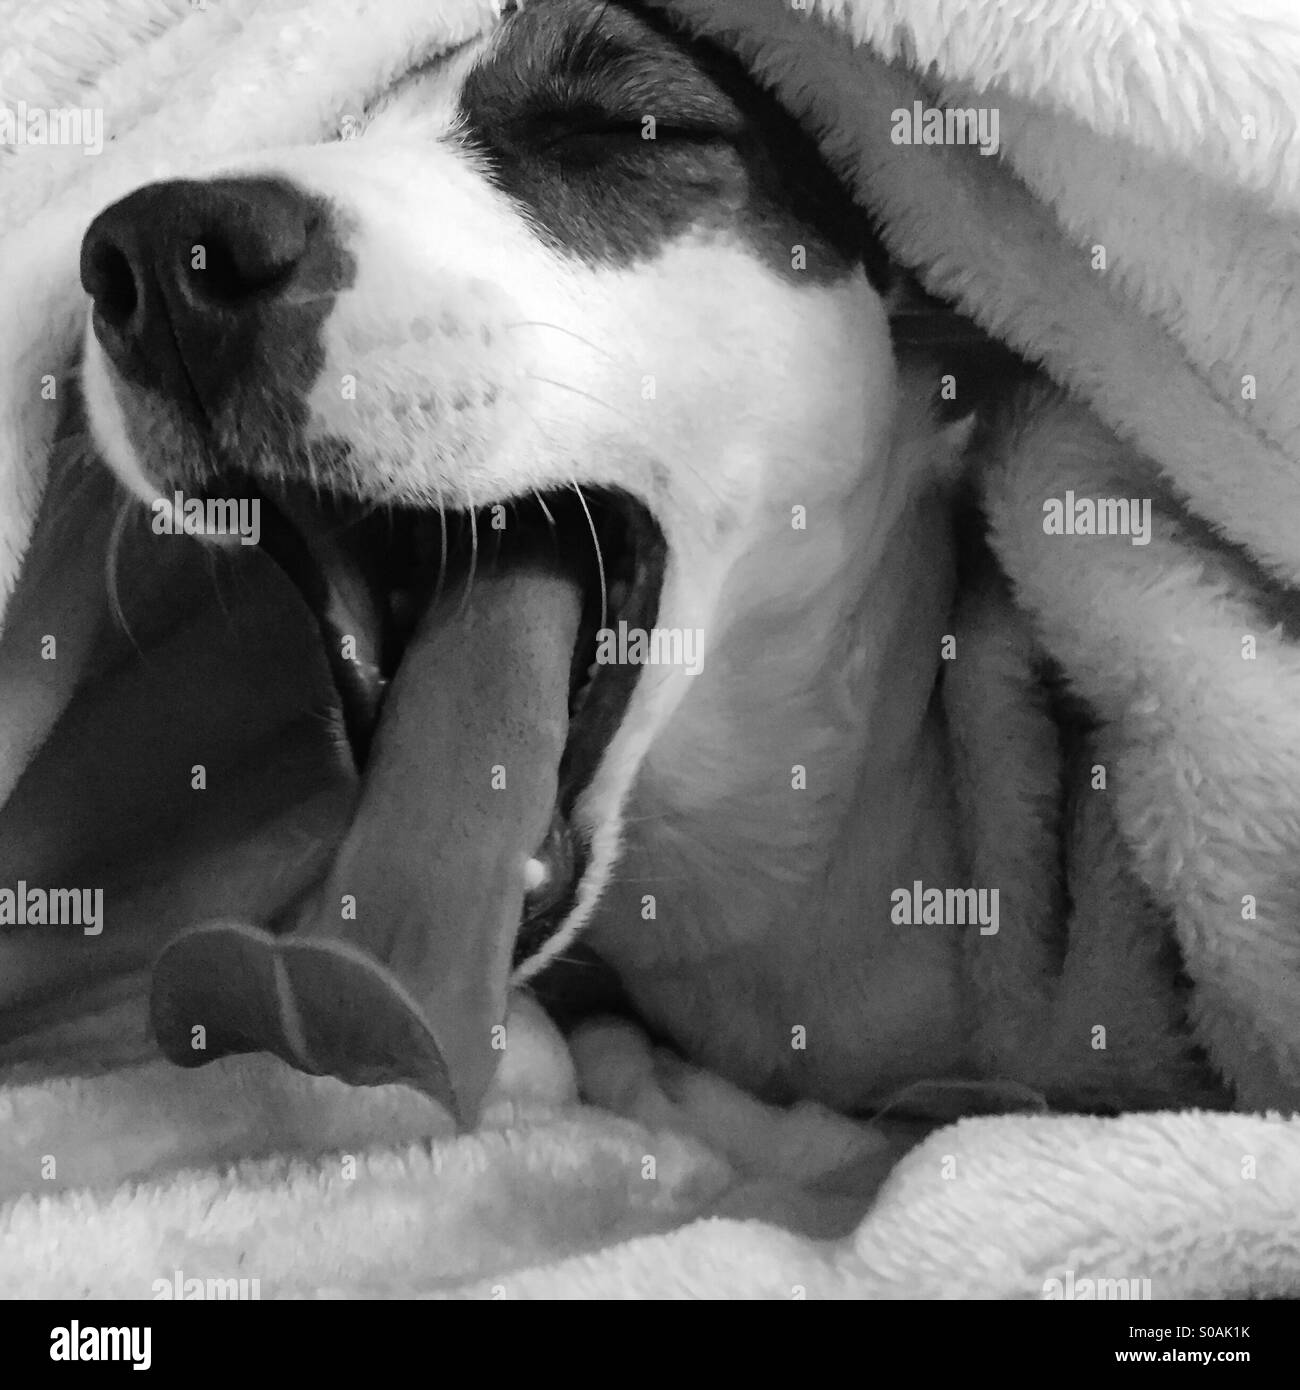 A big yawn by this Jack Russell Terrier burrowed under a blanket. In black and white. Stock Photo